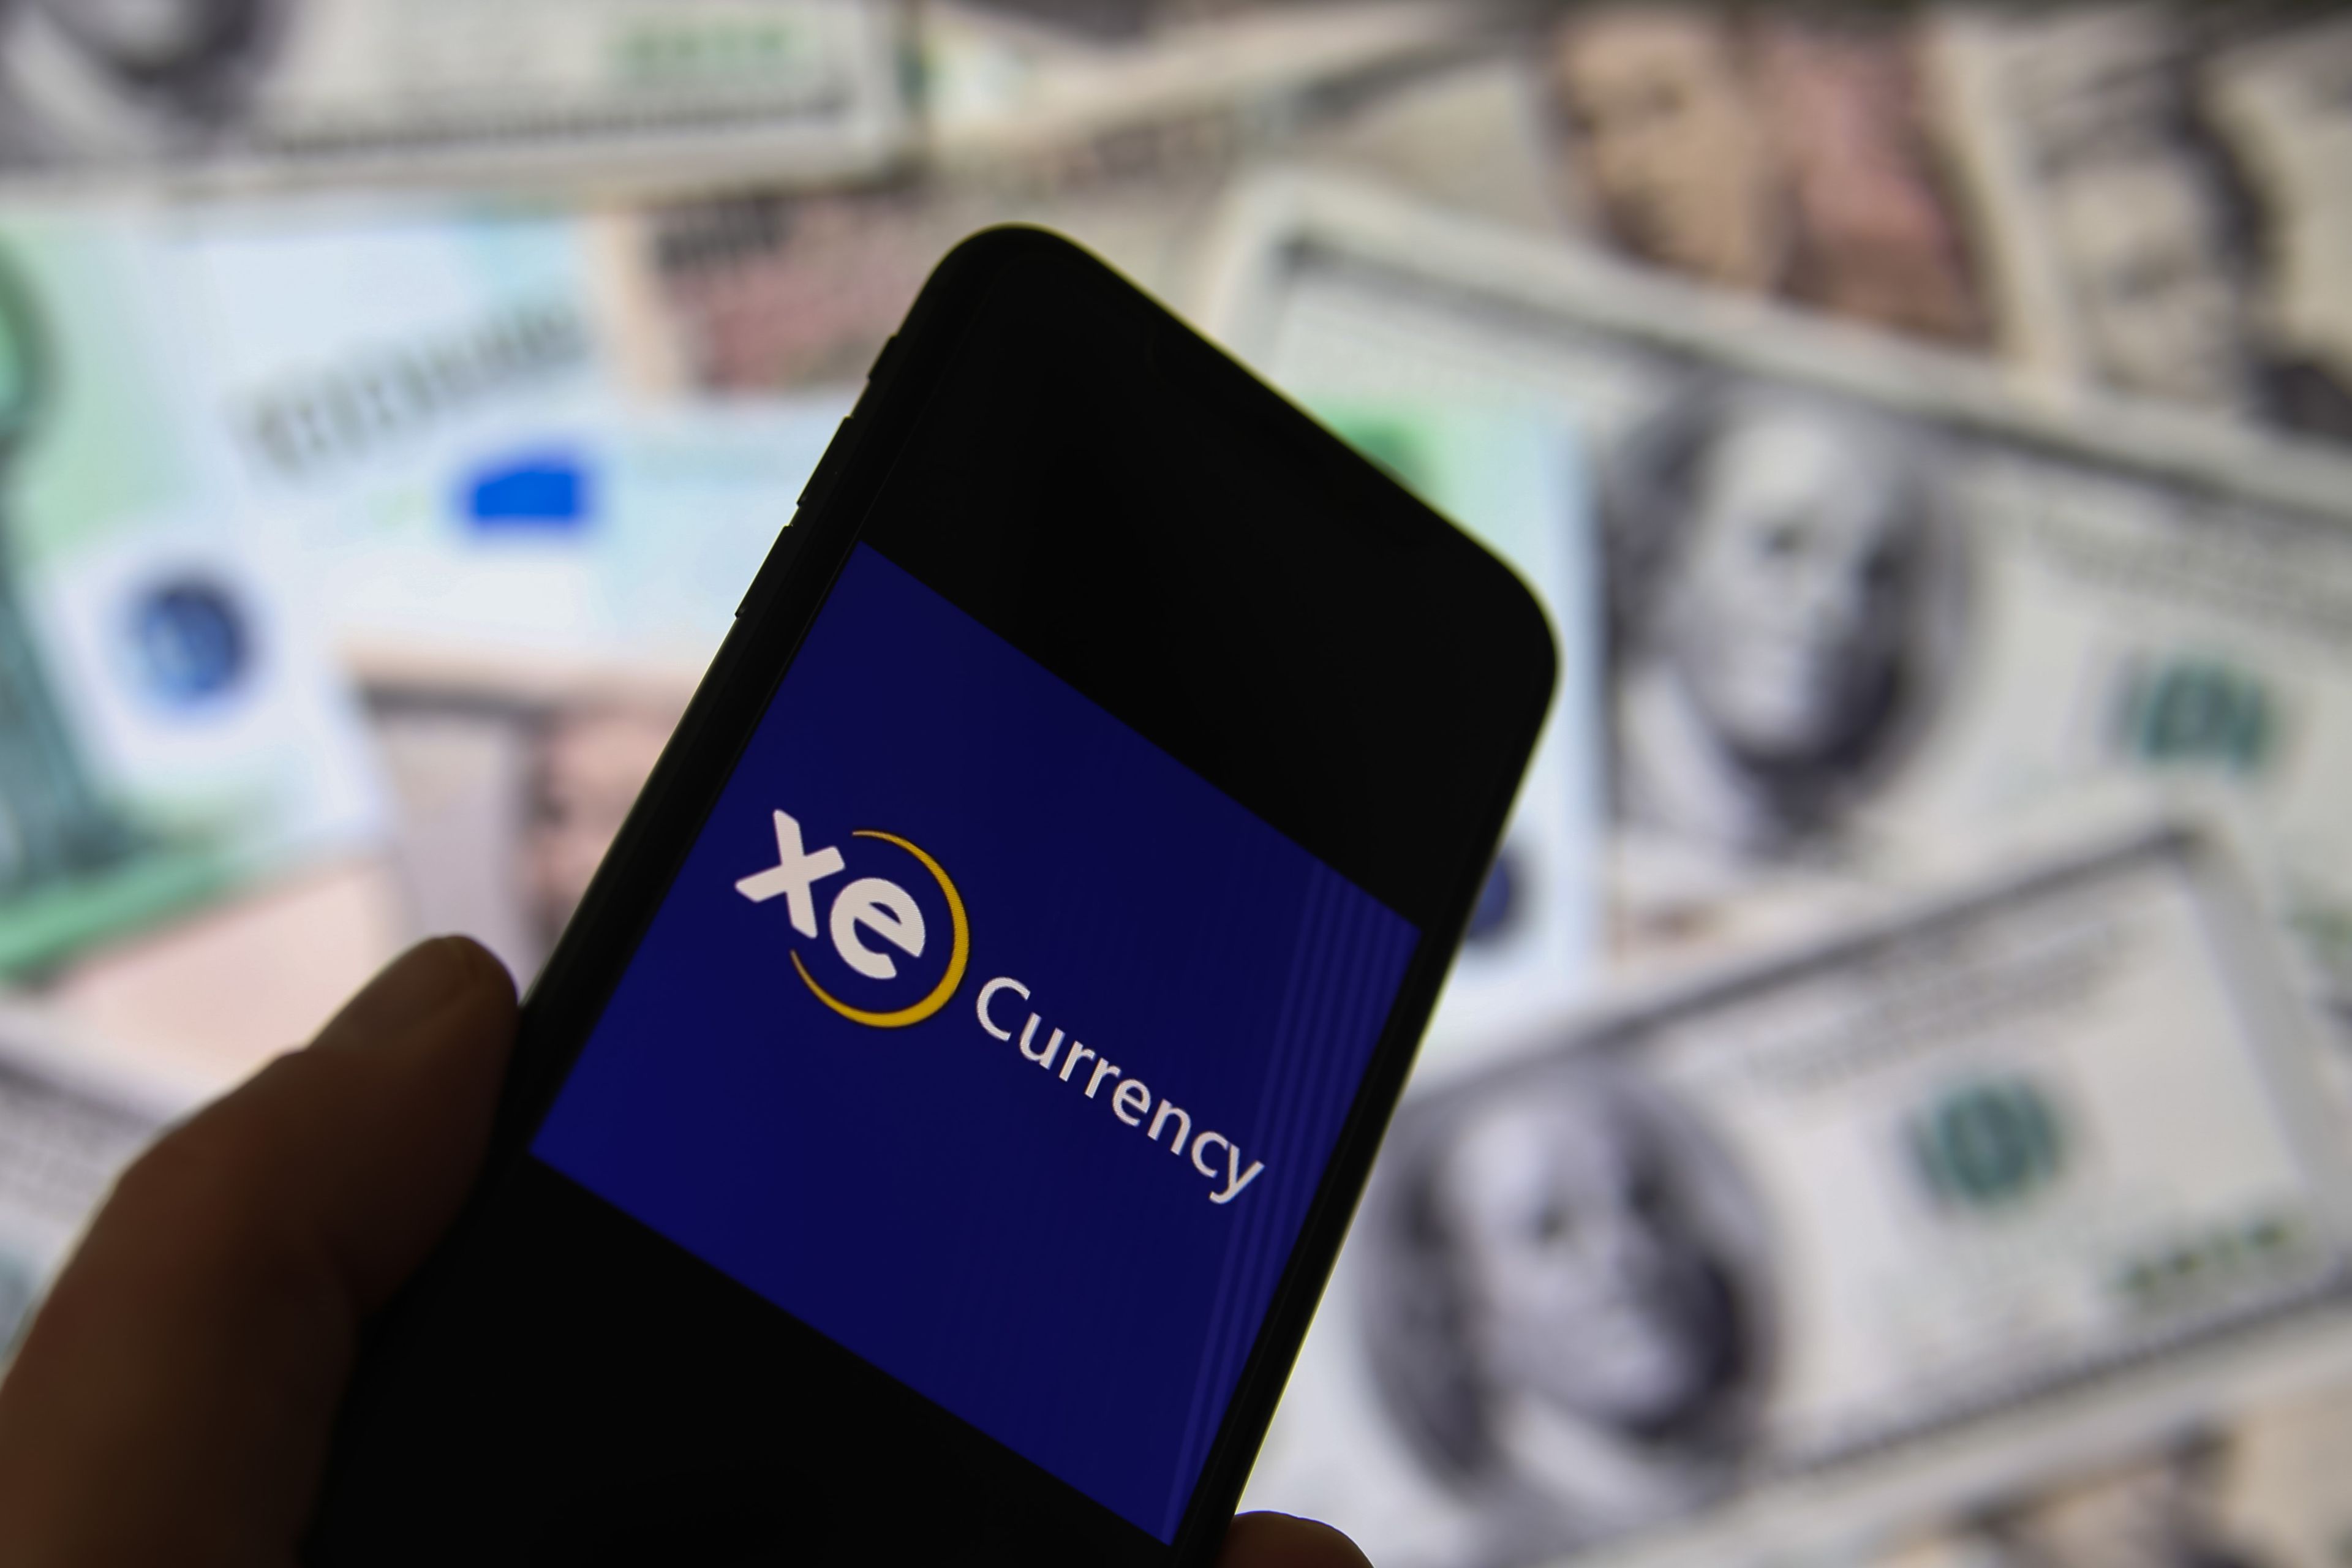 loseup of smartphone screen with logo lettering of online money transfer service xe currency, blurred banknotes